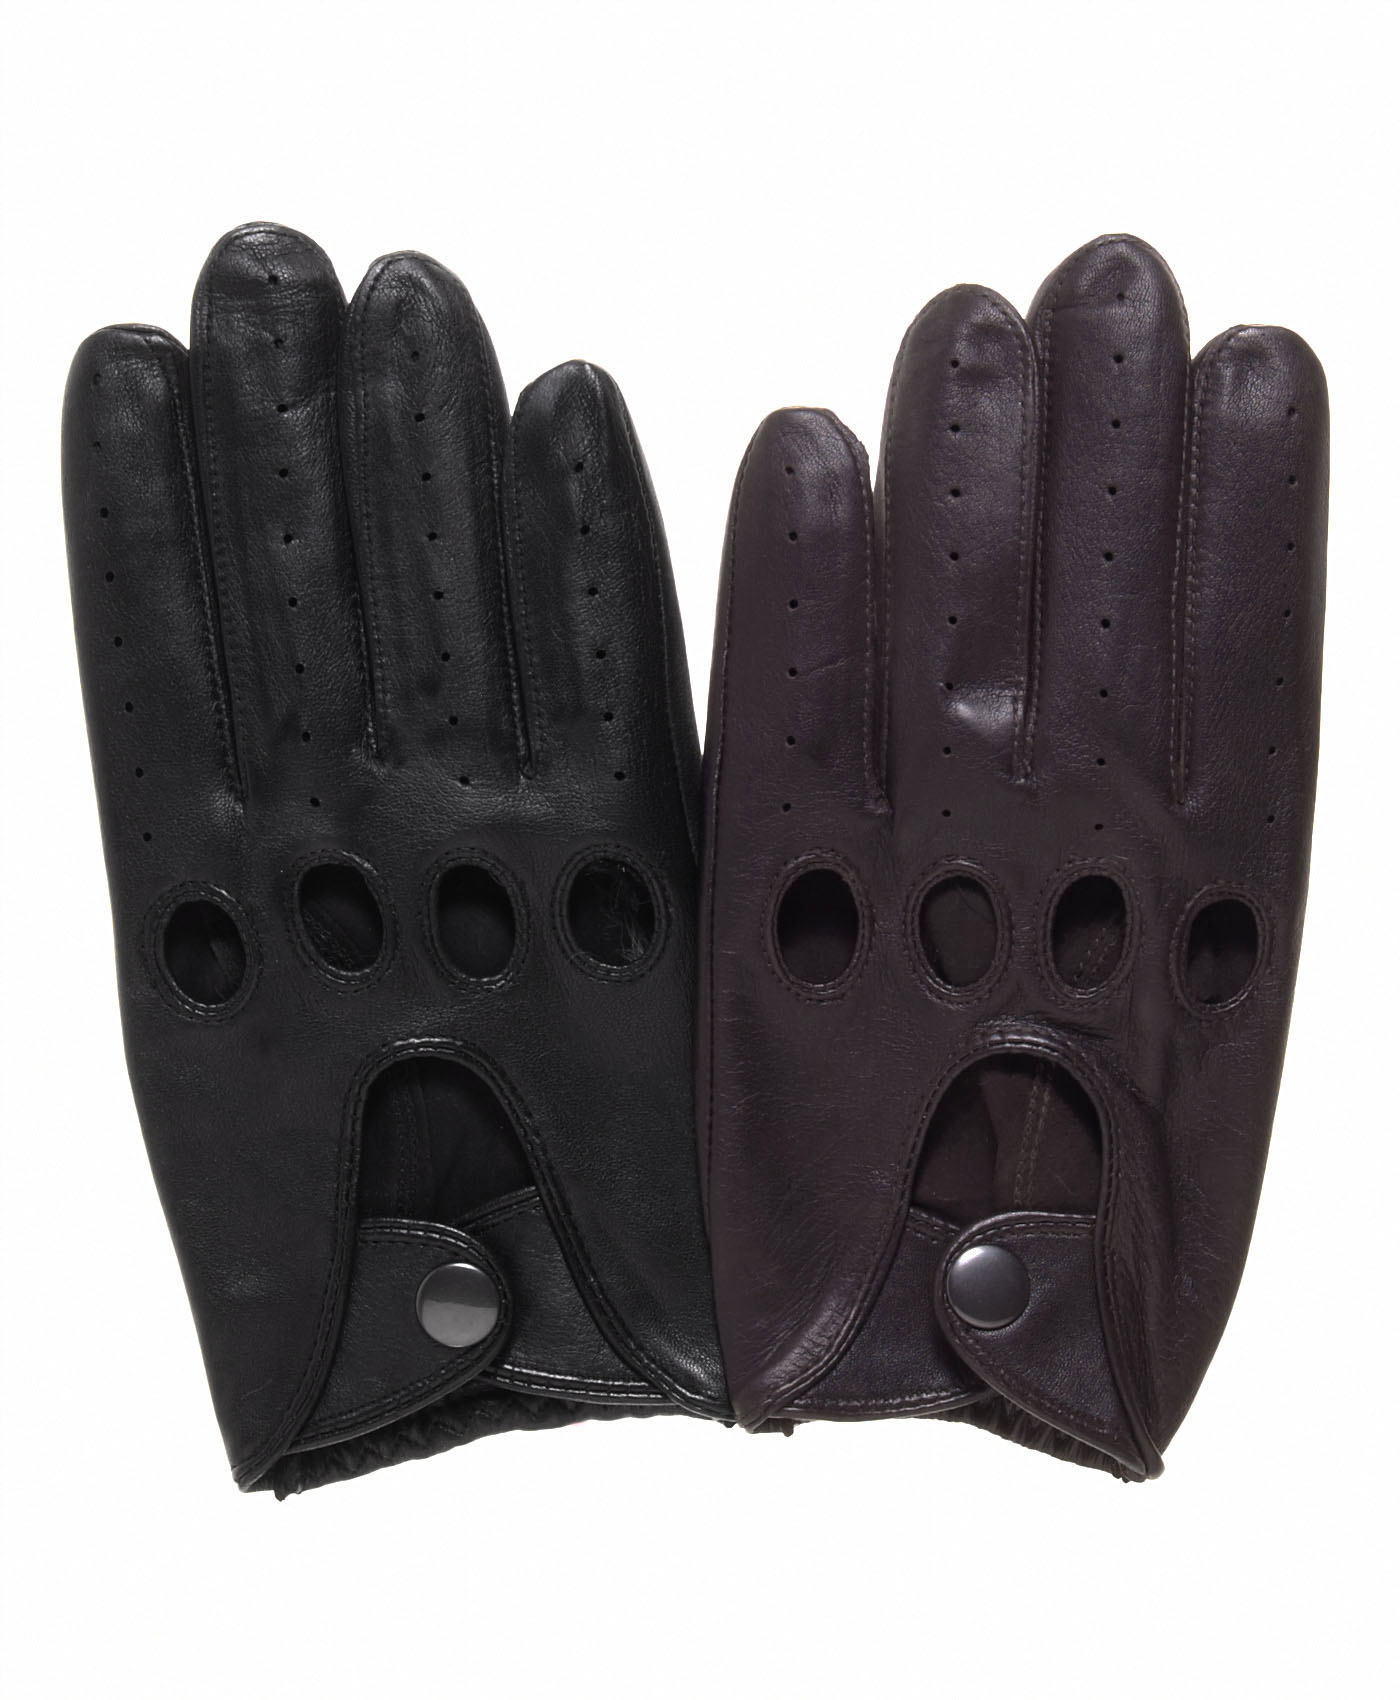 Men's Leather Driving Gloves from Leather Gloves Online - The ...